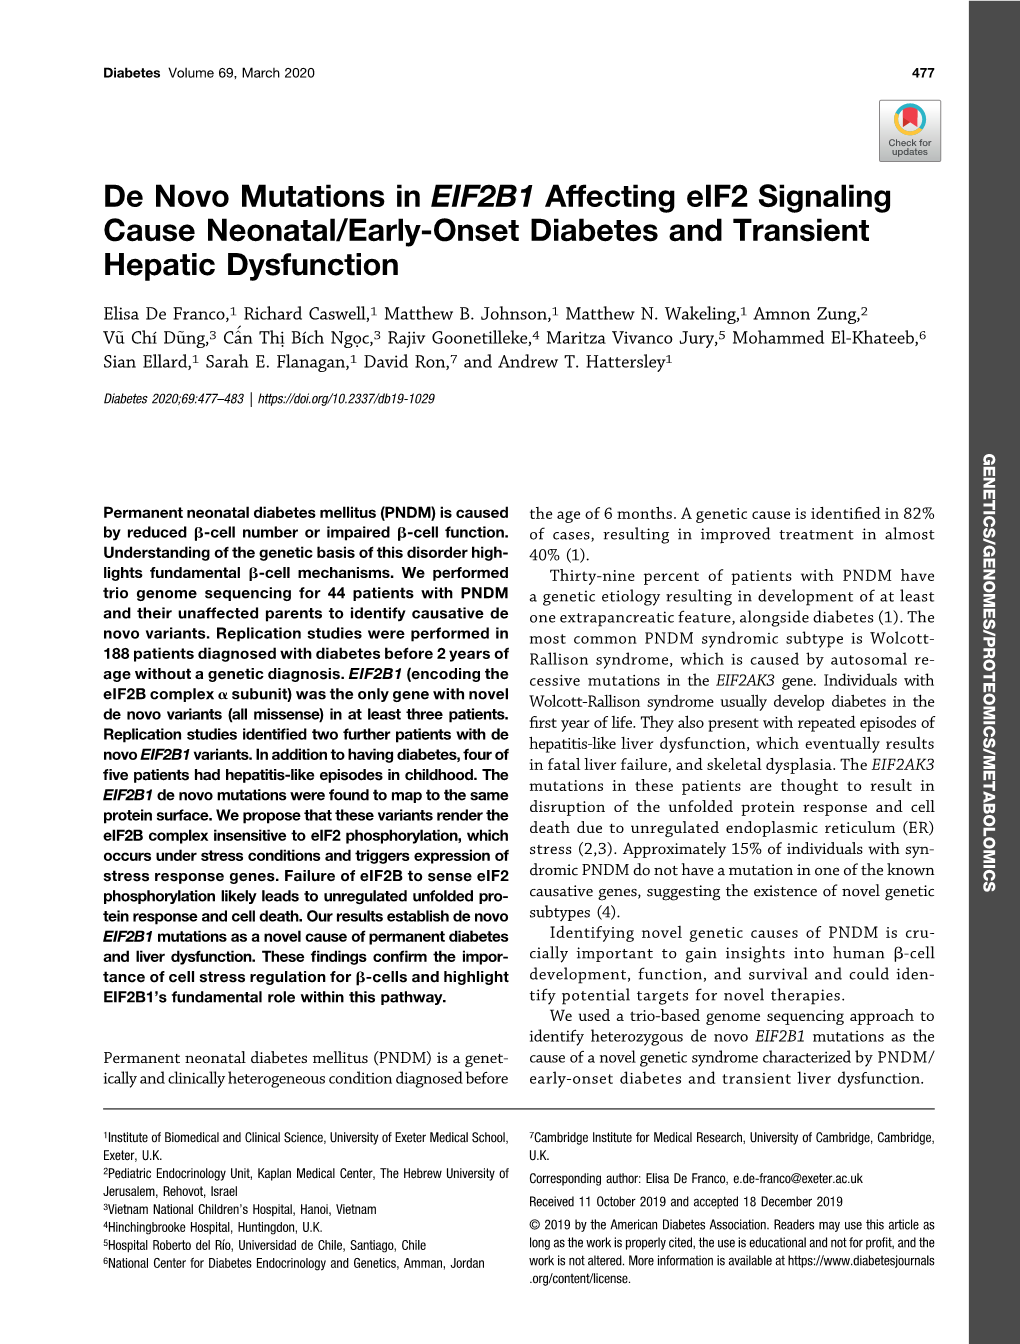 De Novo Mutations in EIF2B1 Affecting Eif2 Signaling Cause Neonatal/Early-Onset Diabetes and Transient Hepatic Dysfunction